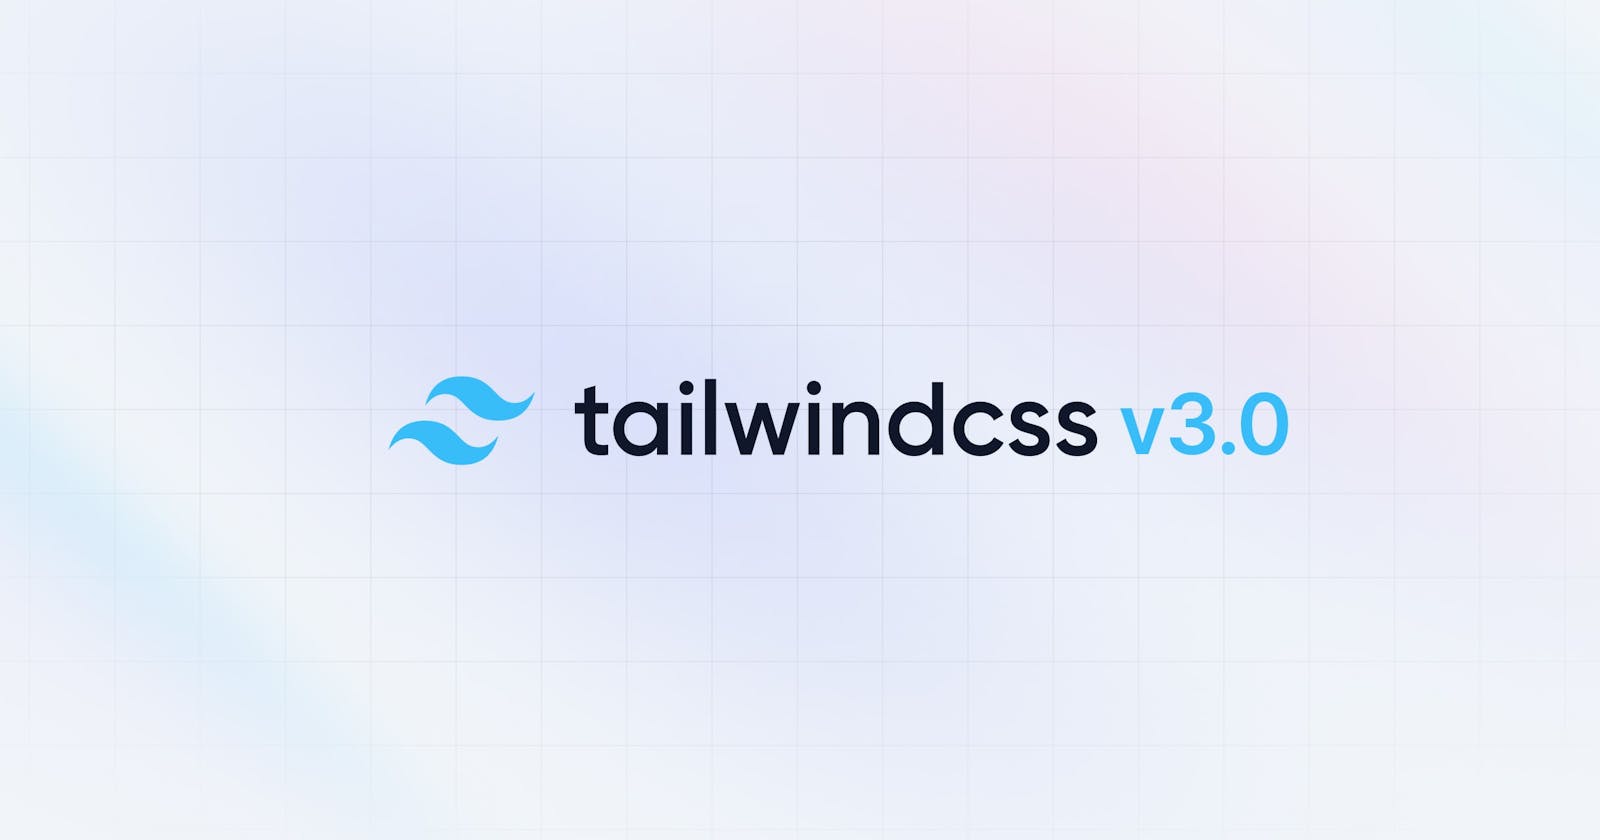 Upgrade your Tailwind CSS project to version 3.0